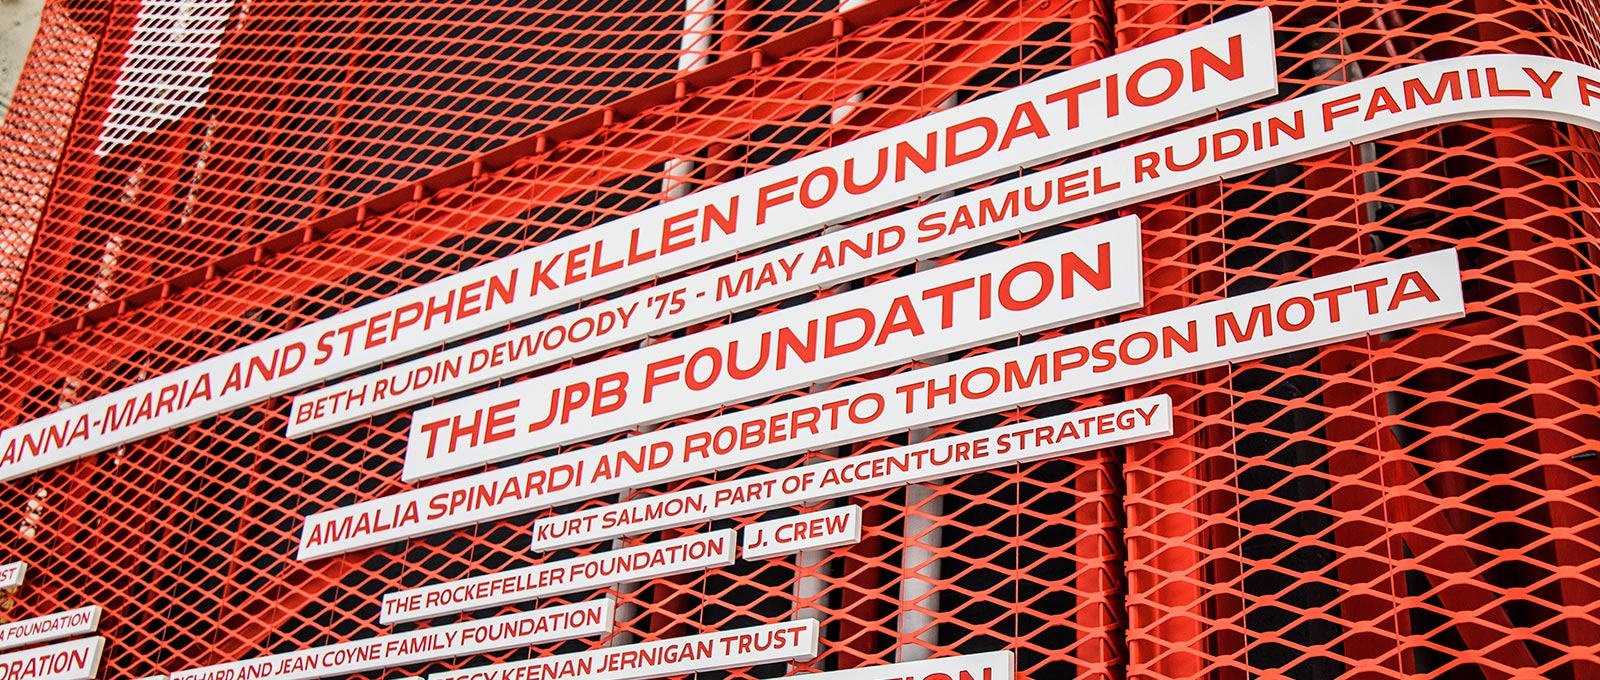 Parsons School of Design Donor Wall